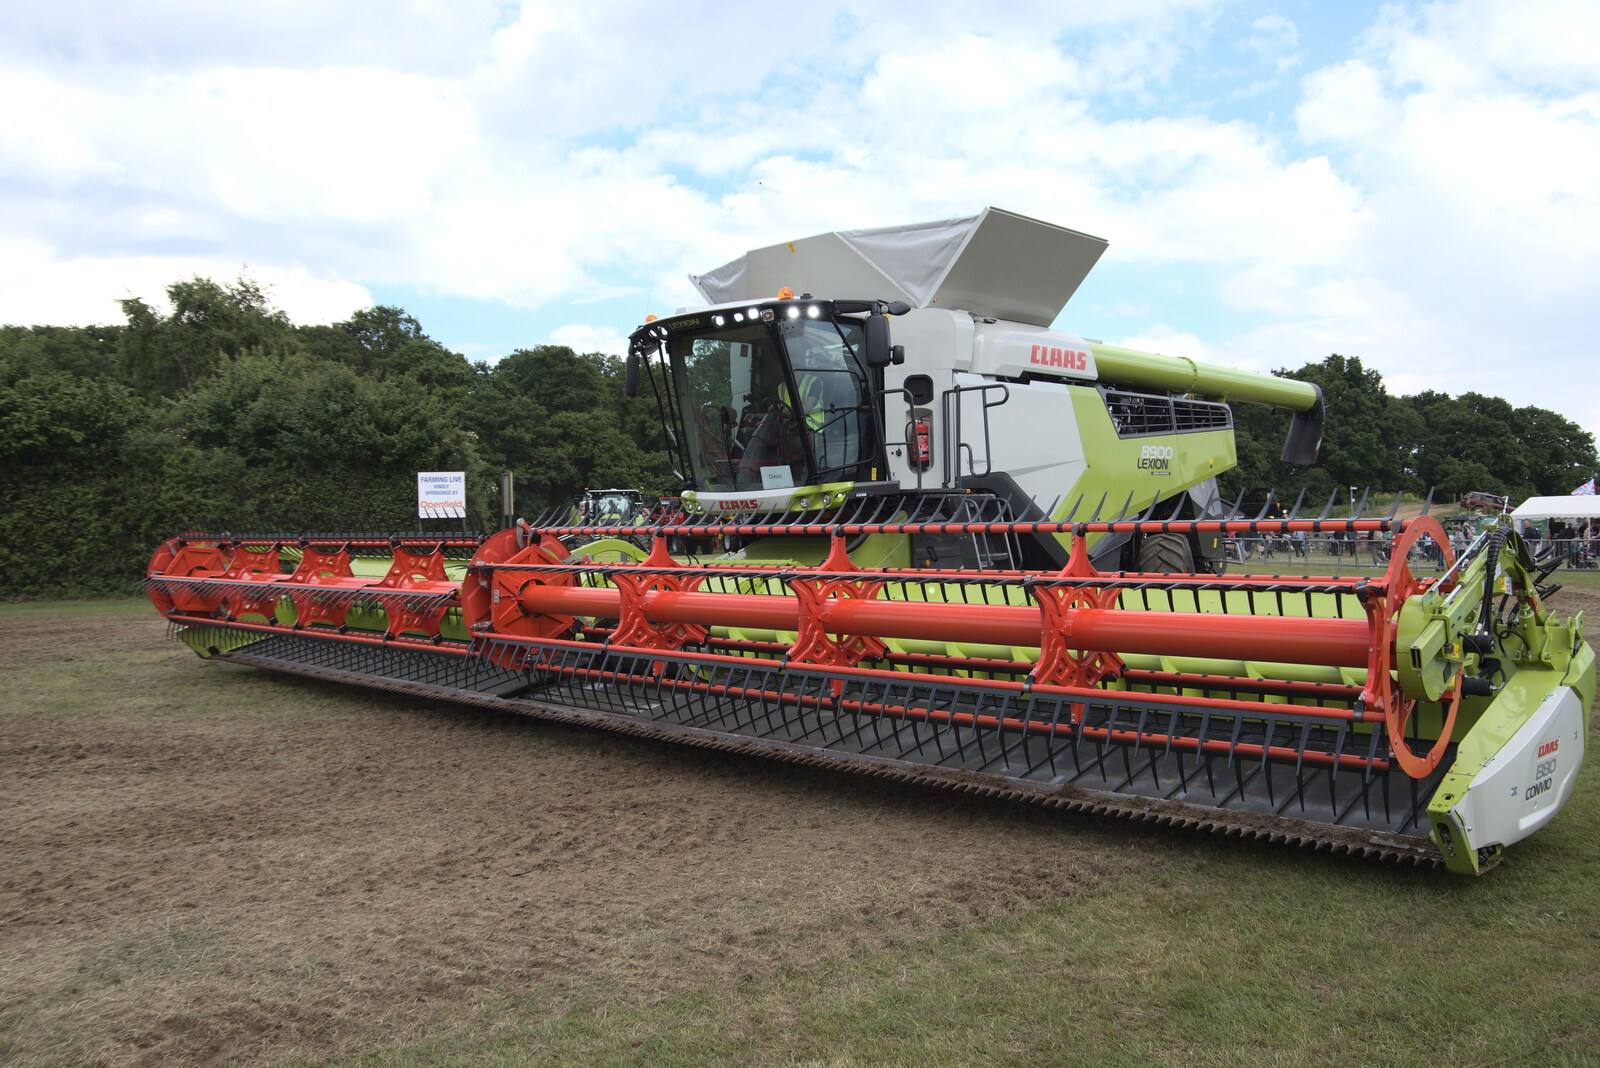 The Suffolk Show, Trinity Park, Ipswich - 1st June 2022: A massive combine harvester does a demonstration